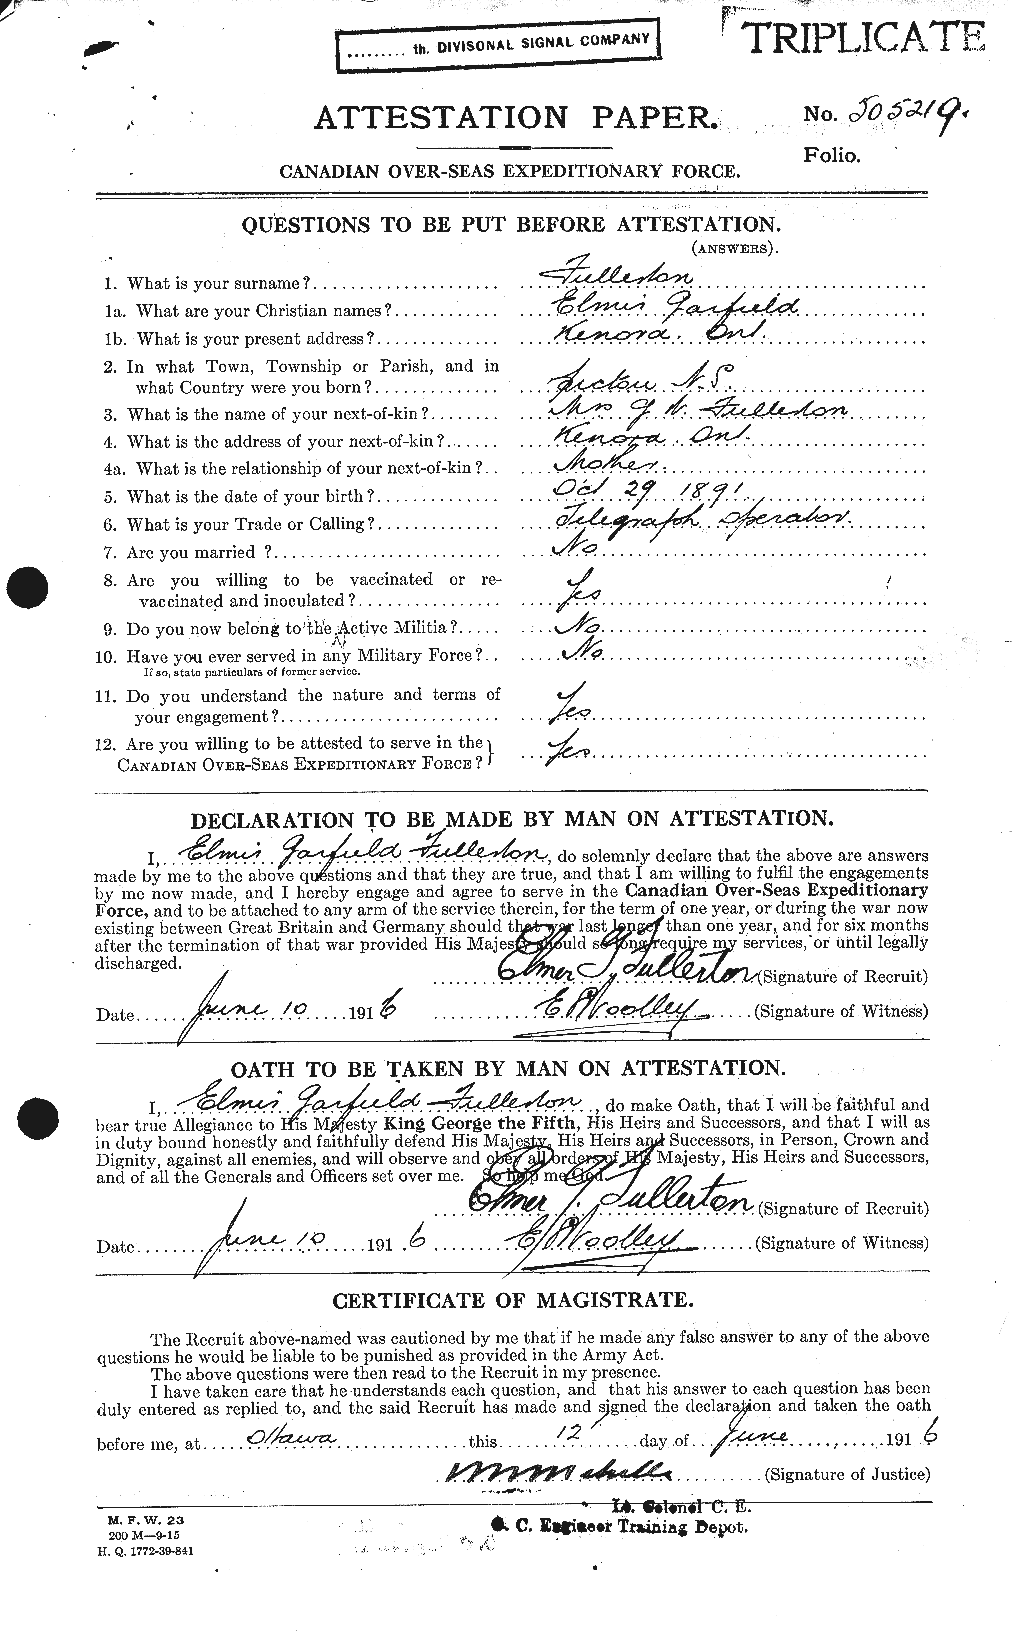 Personnel Records of the First World War - CEF 341250a